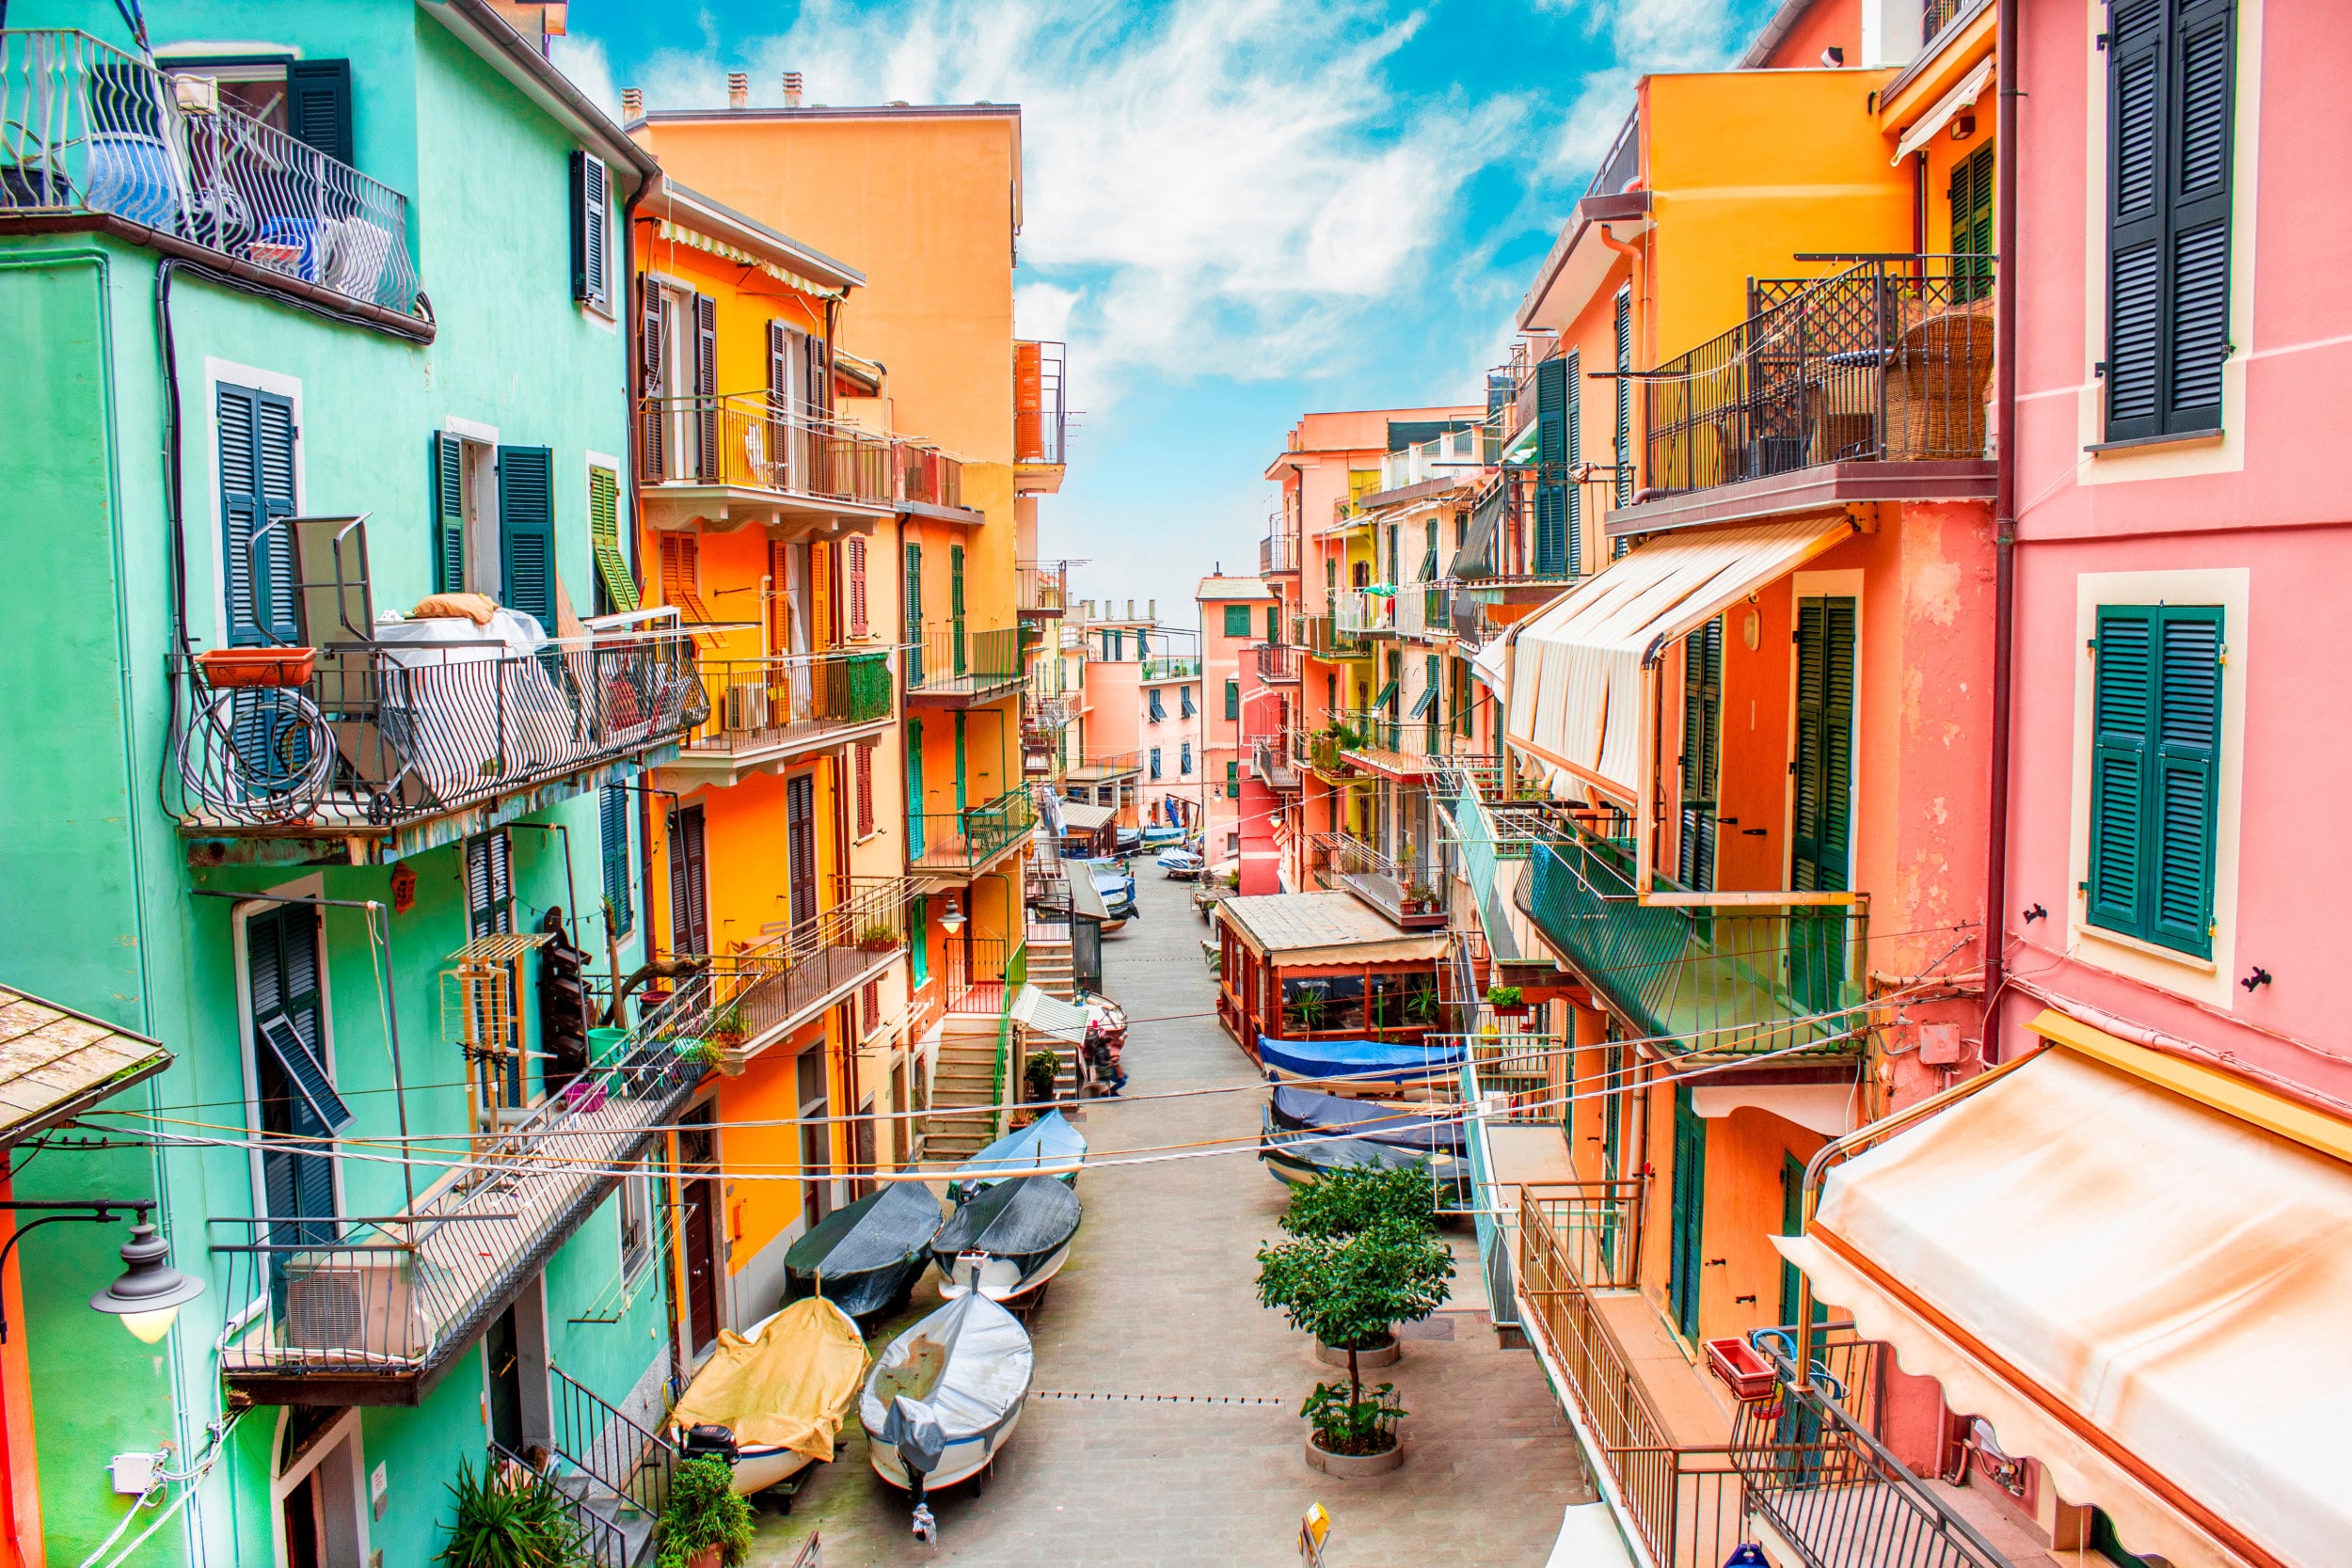 Houses of Cinque Terre